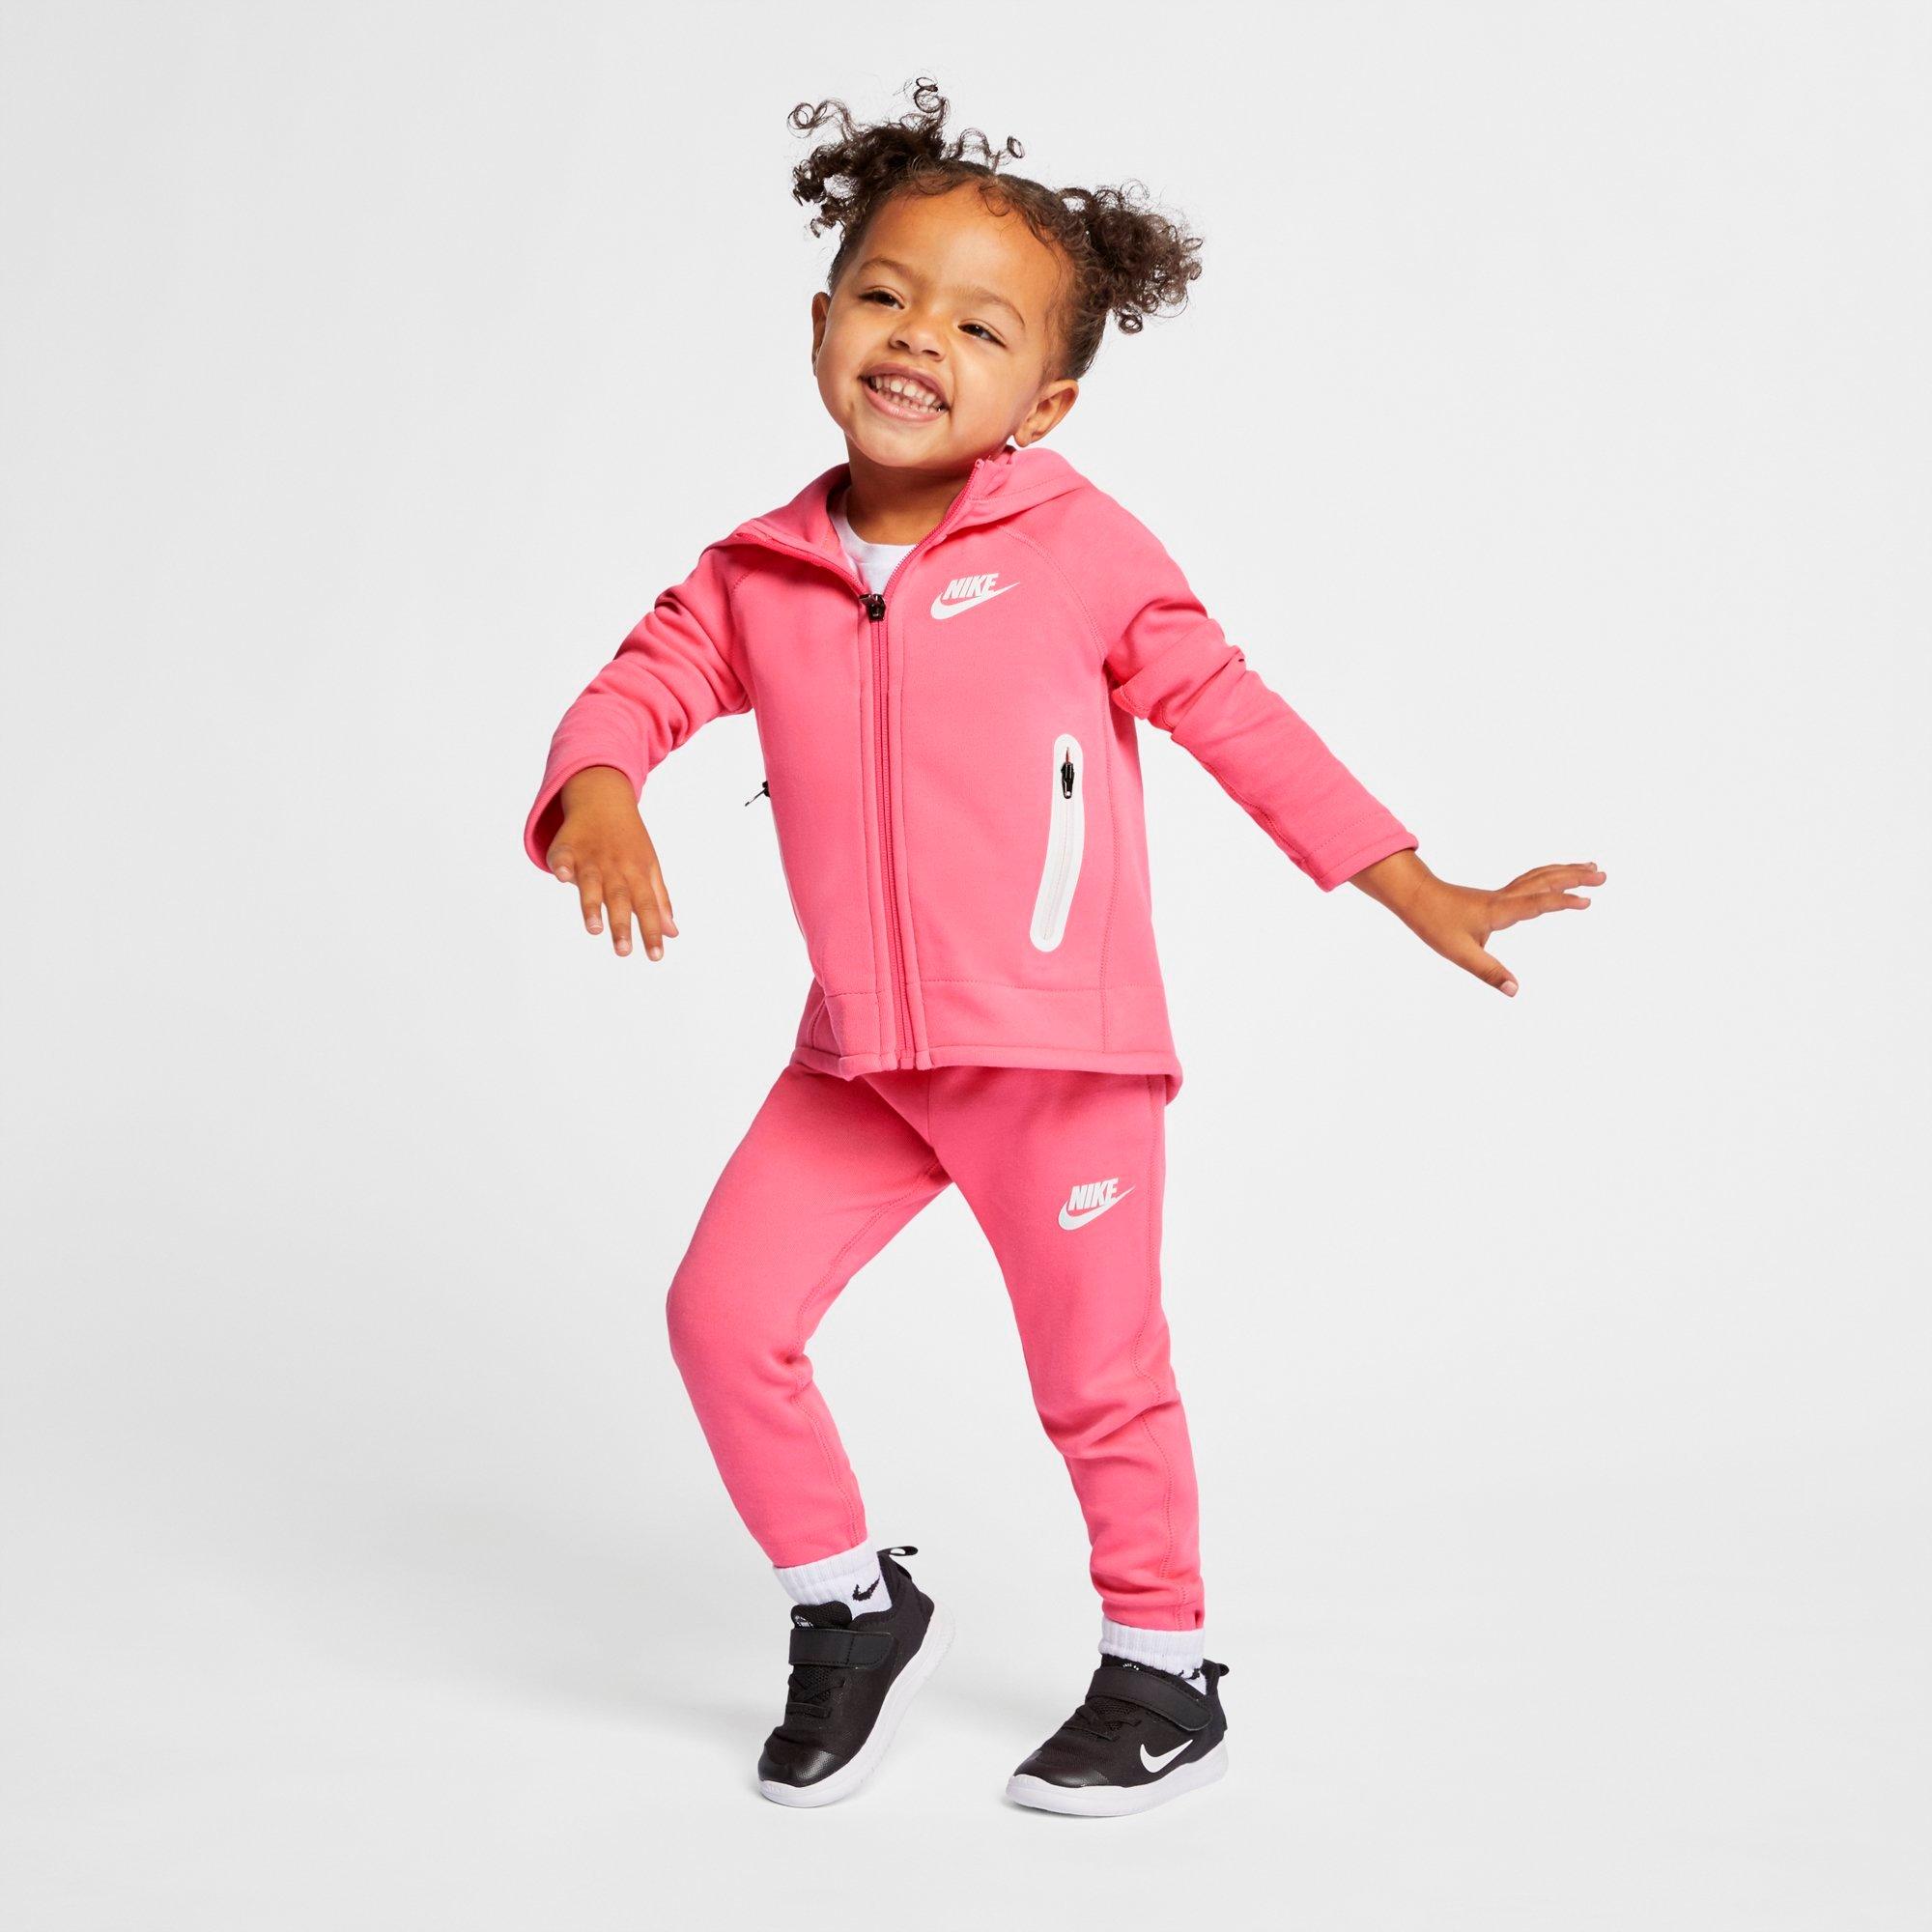 nike outfits for girl toddlers